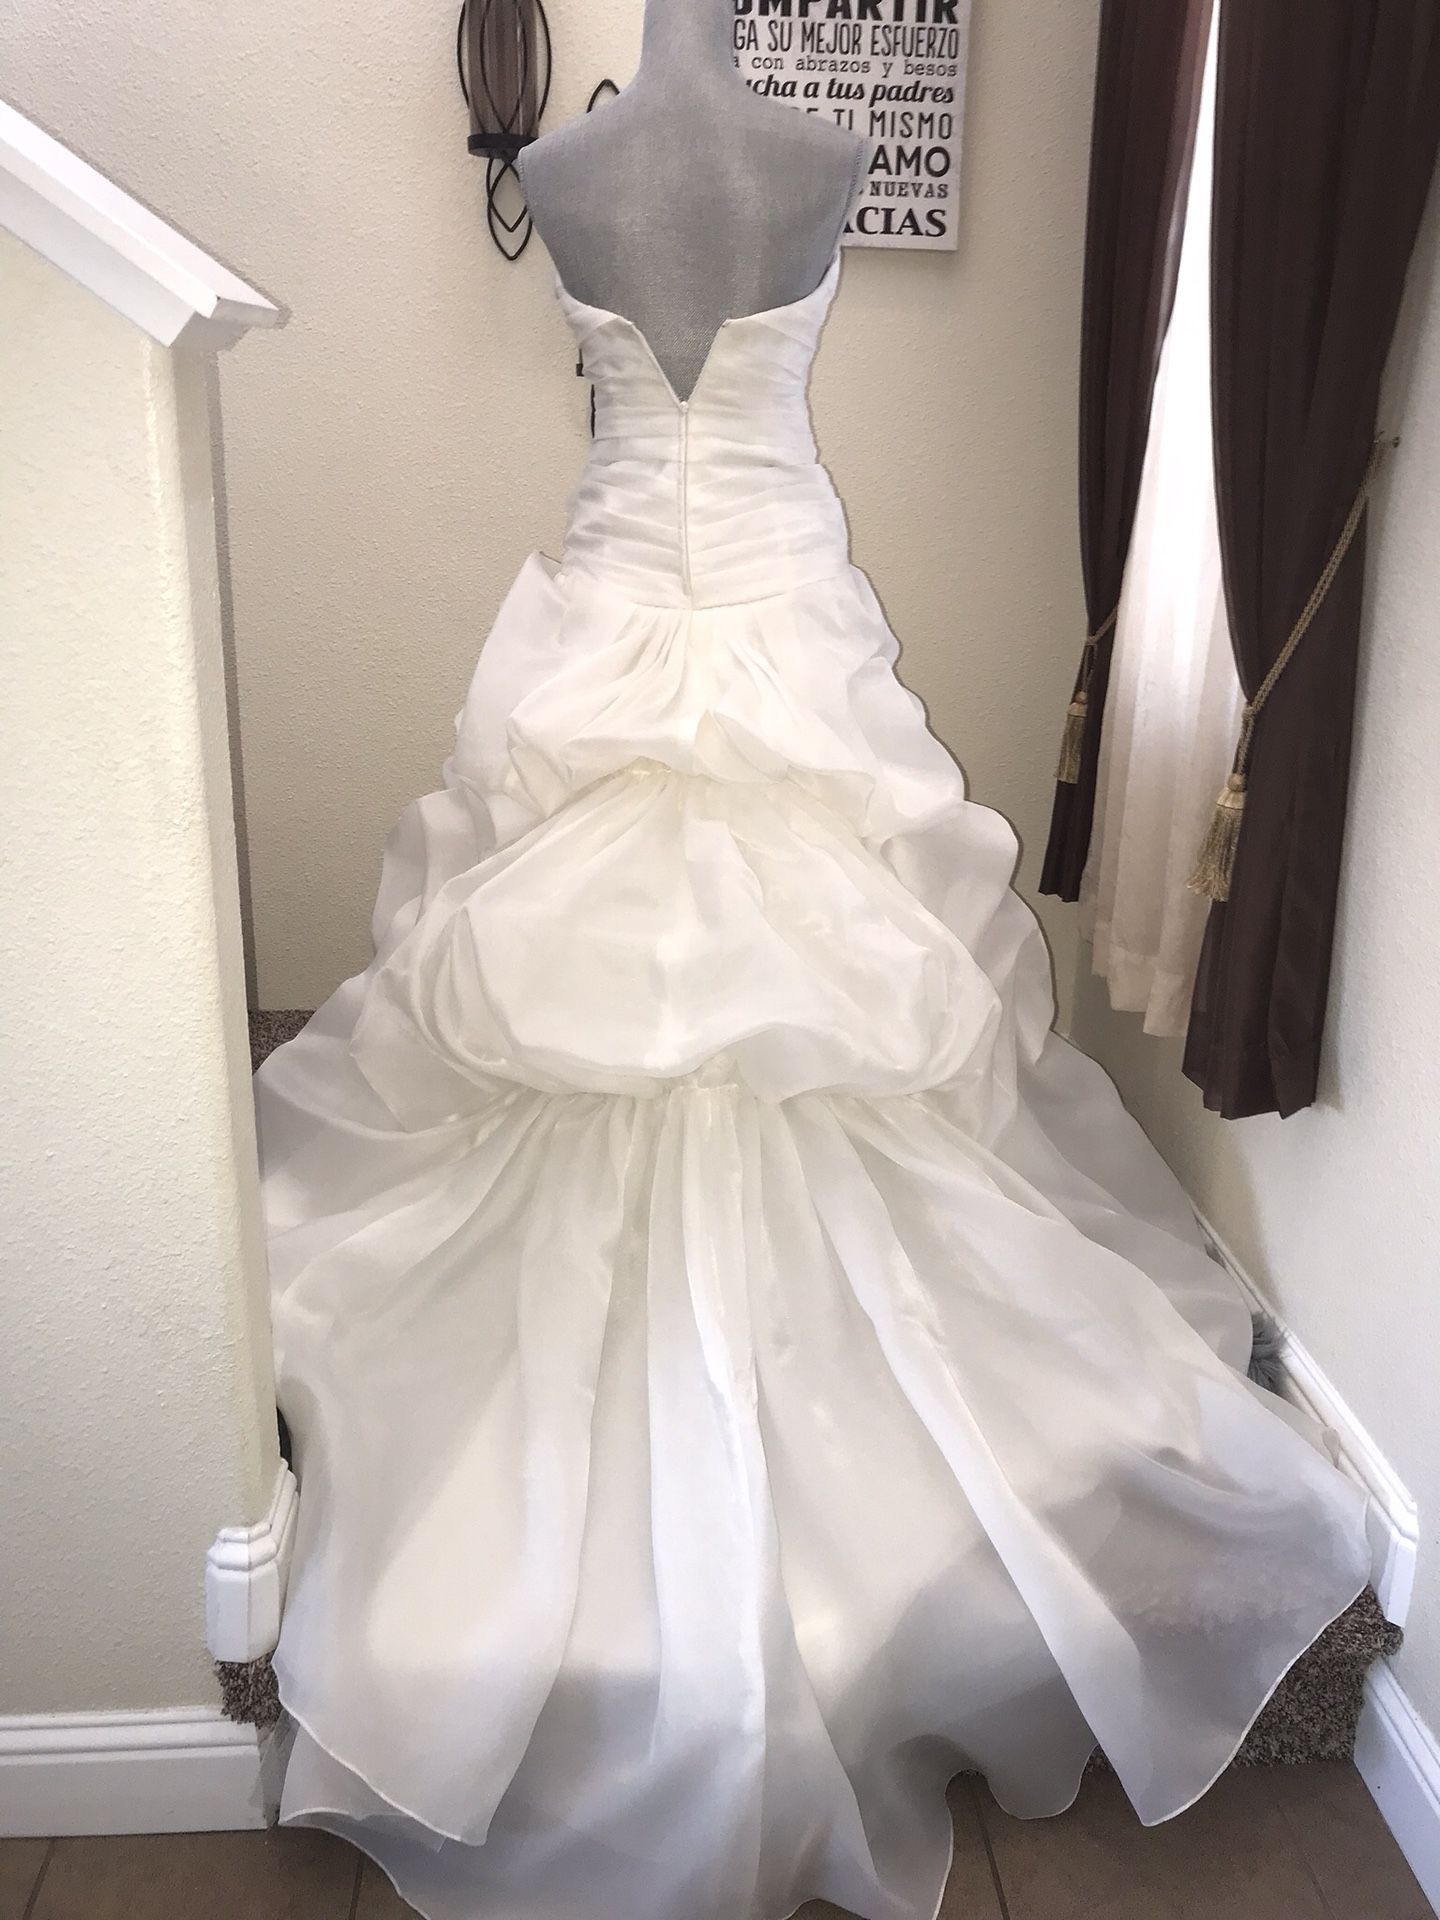 New wedding dress ivory size #4 it's w/vail including tangs still on it.